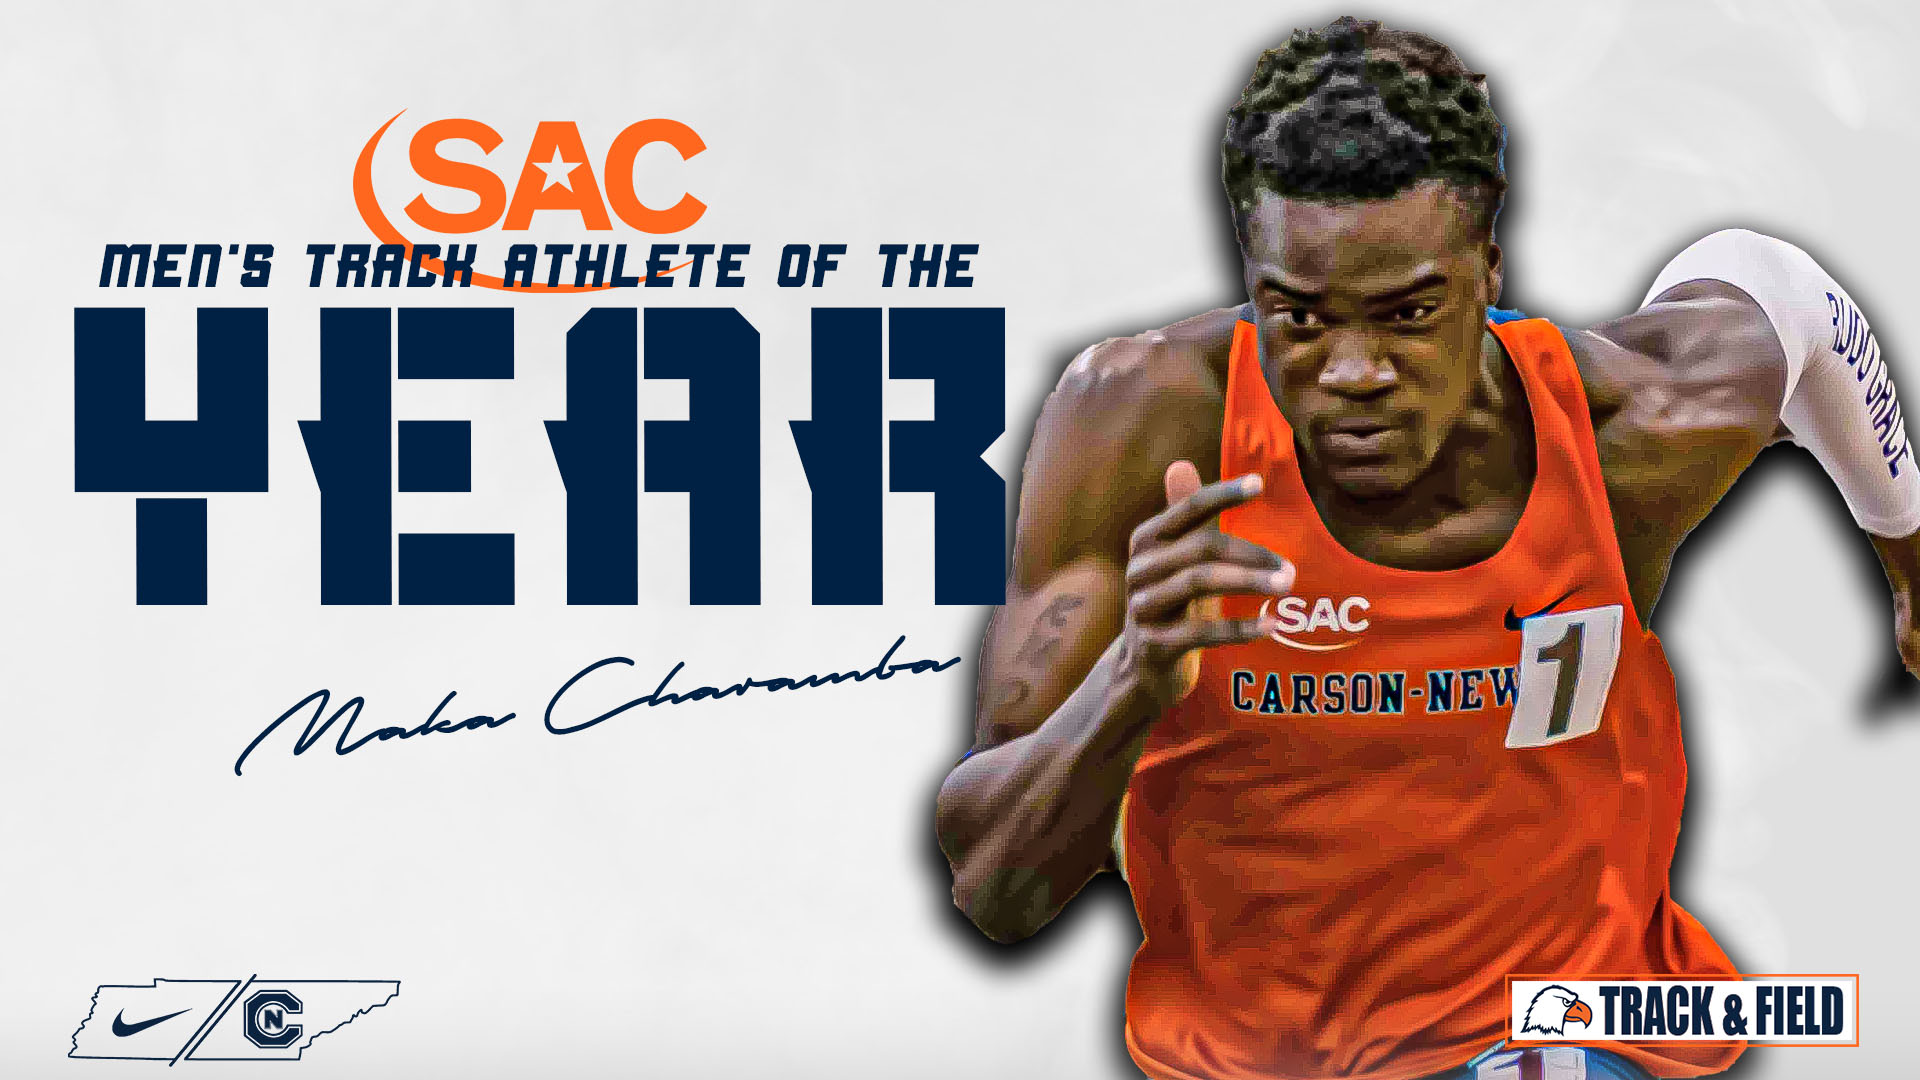 Charamaba runs away with SAC Men's Outdoor Track Athlete of the Year